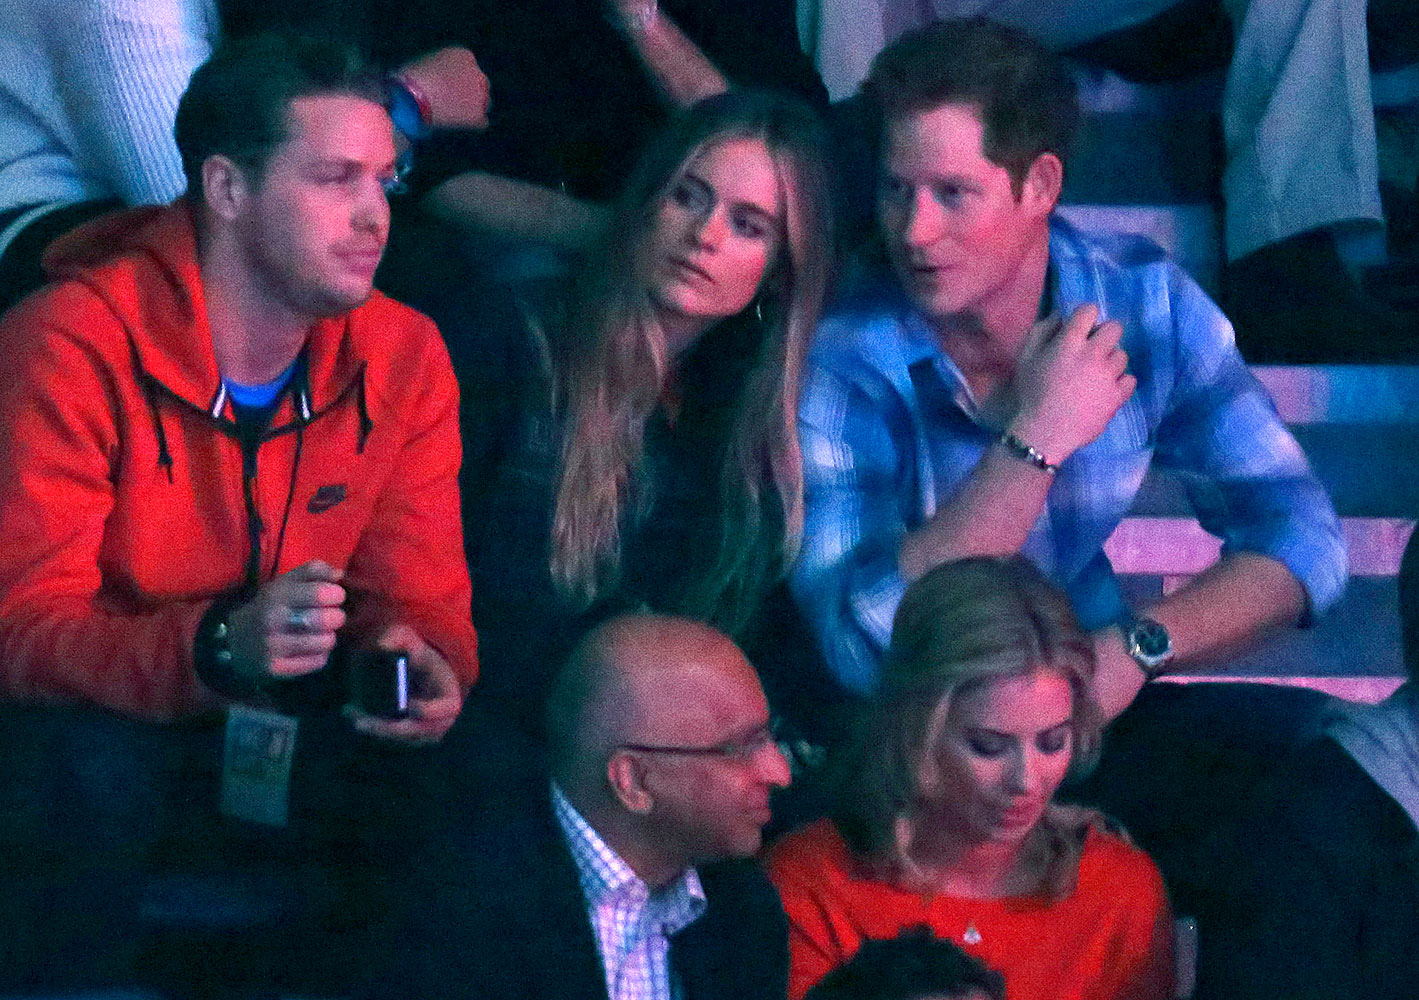 Britain's Prince Harry (R) and Cressida Bonas (2nd R) watch the WE Day UK event at Wembley Arena in London March 7, 2014. (Luke MacGregor—Reuters)